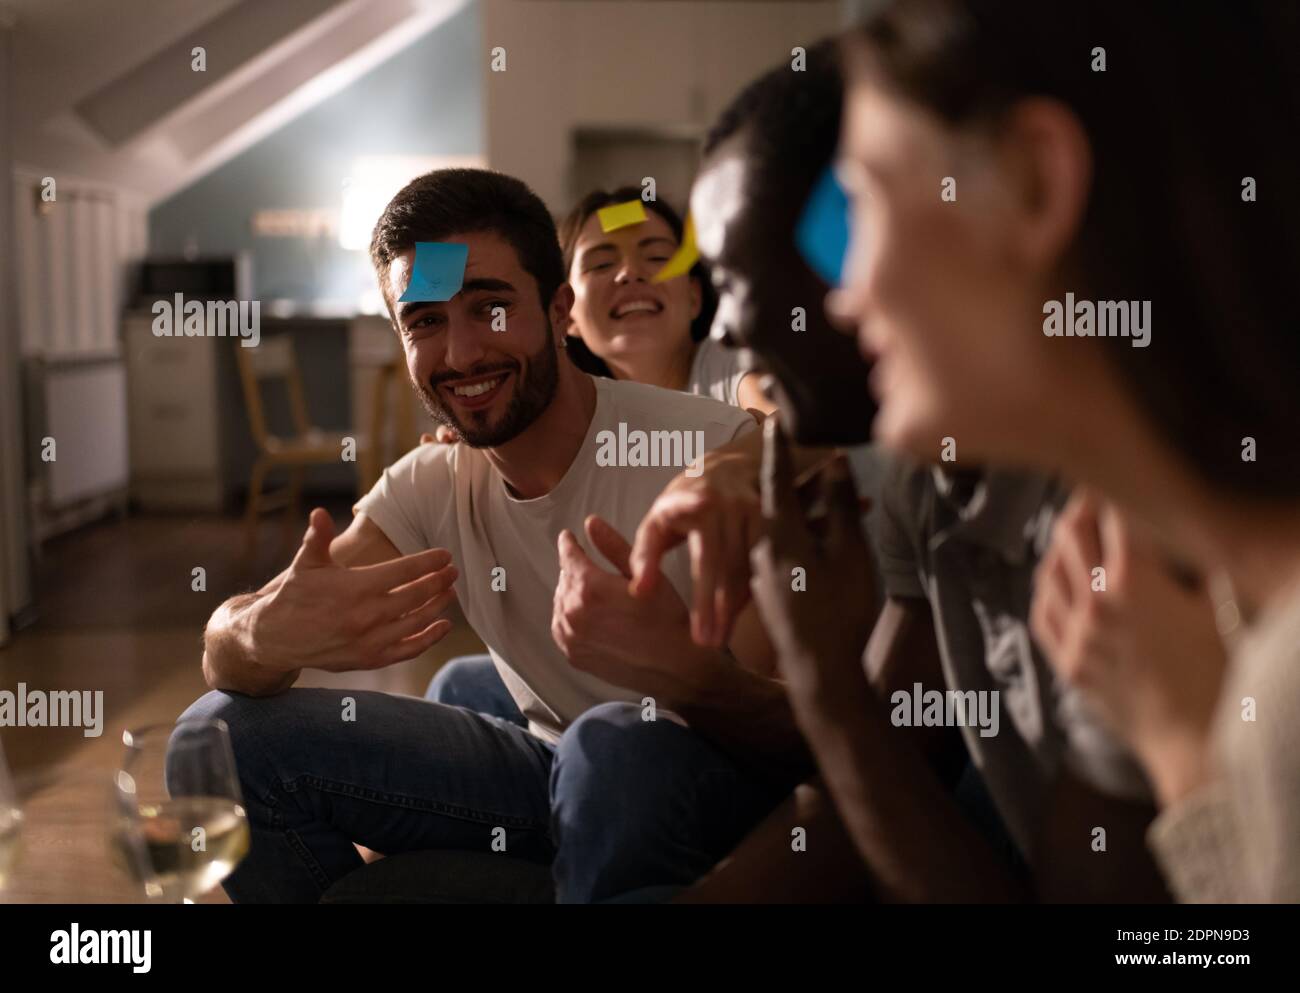 Bewildered young male with sticky note on forehead gesturing and trying to guess who is he while playing funny game with diverse friends during party Stock Photo